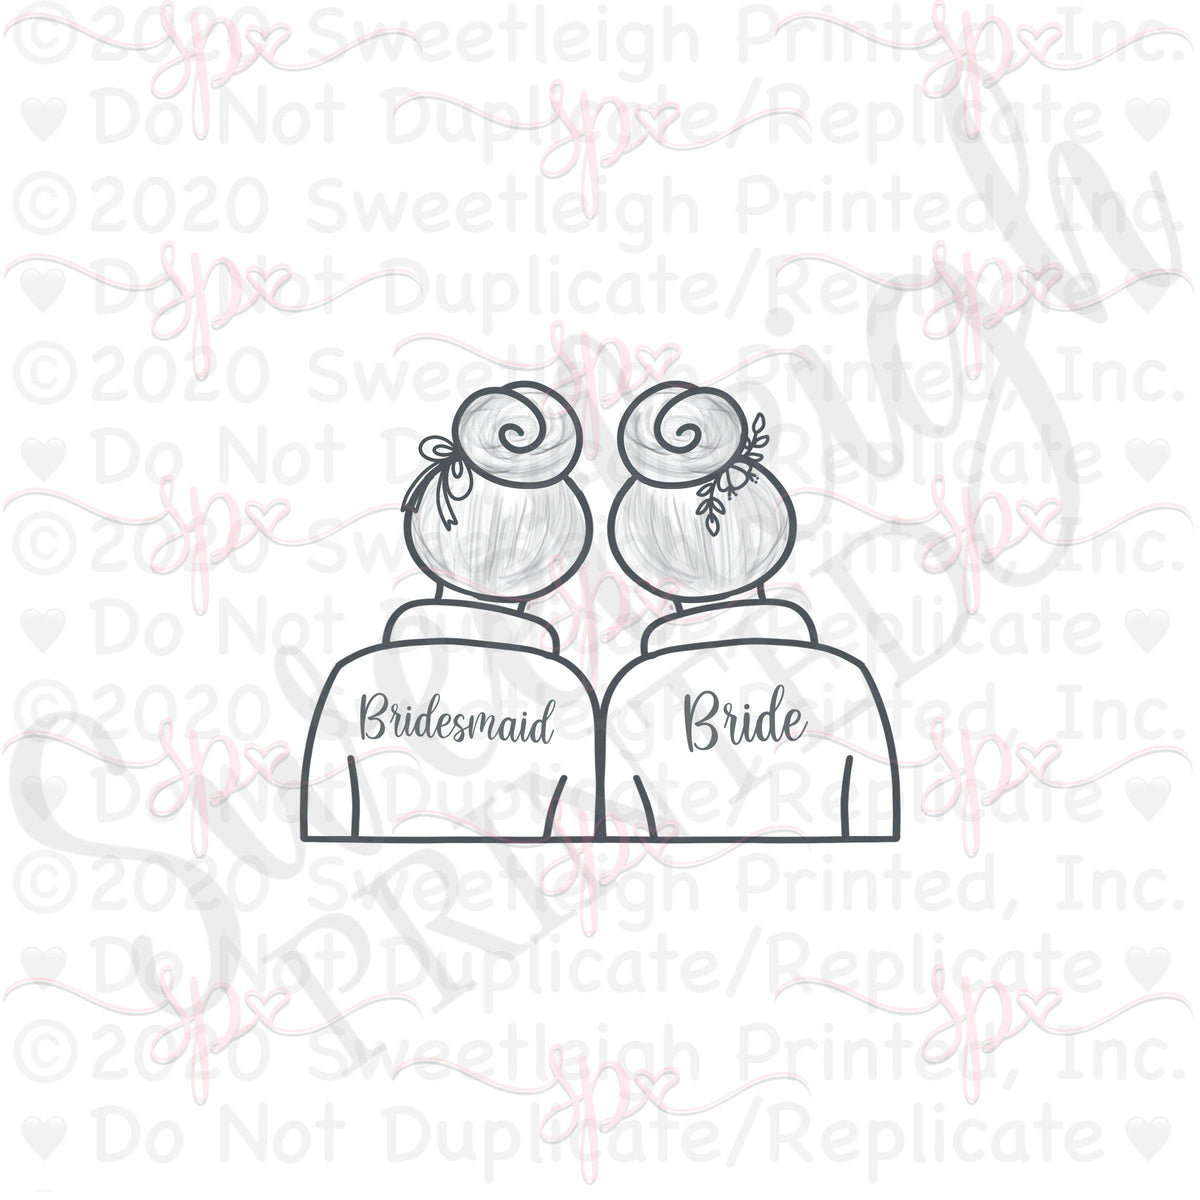 Bride and Bridesmaid Cookie Cutter - Sweetleigh 